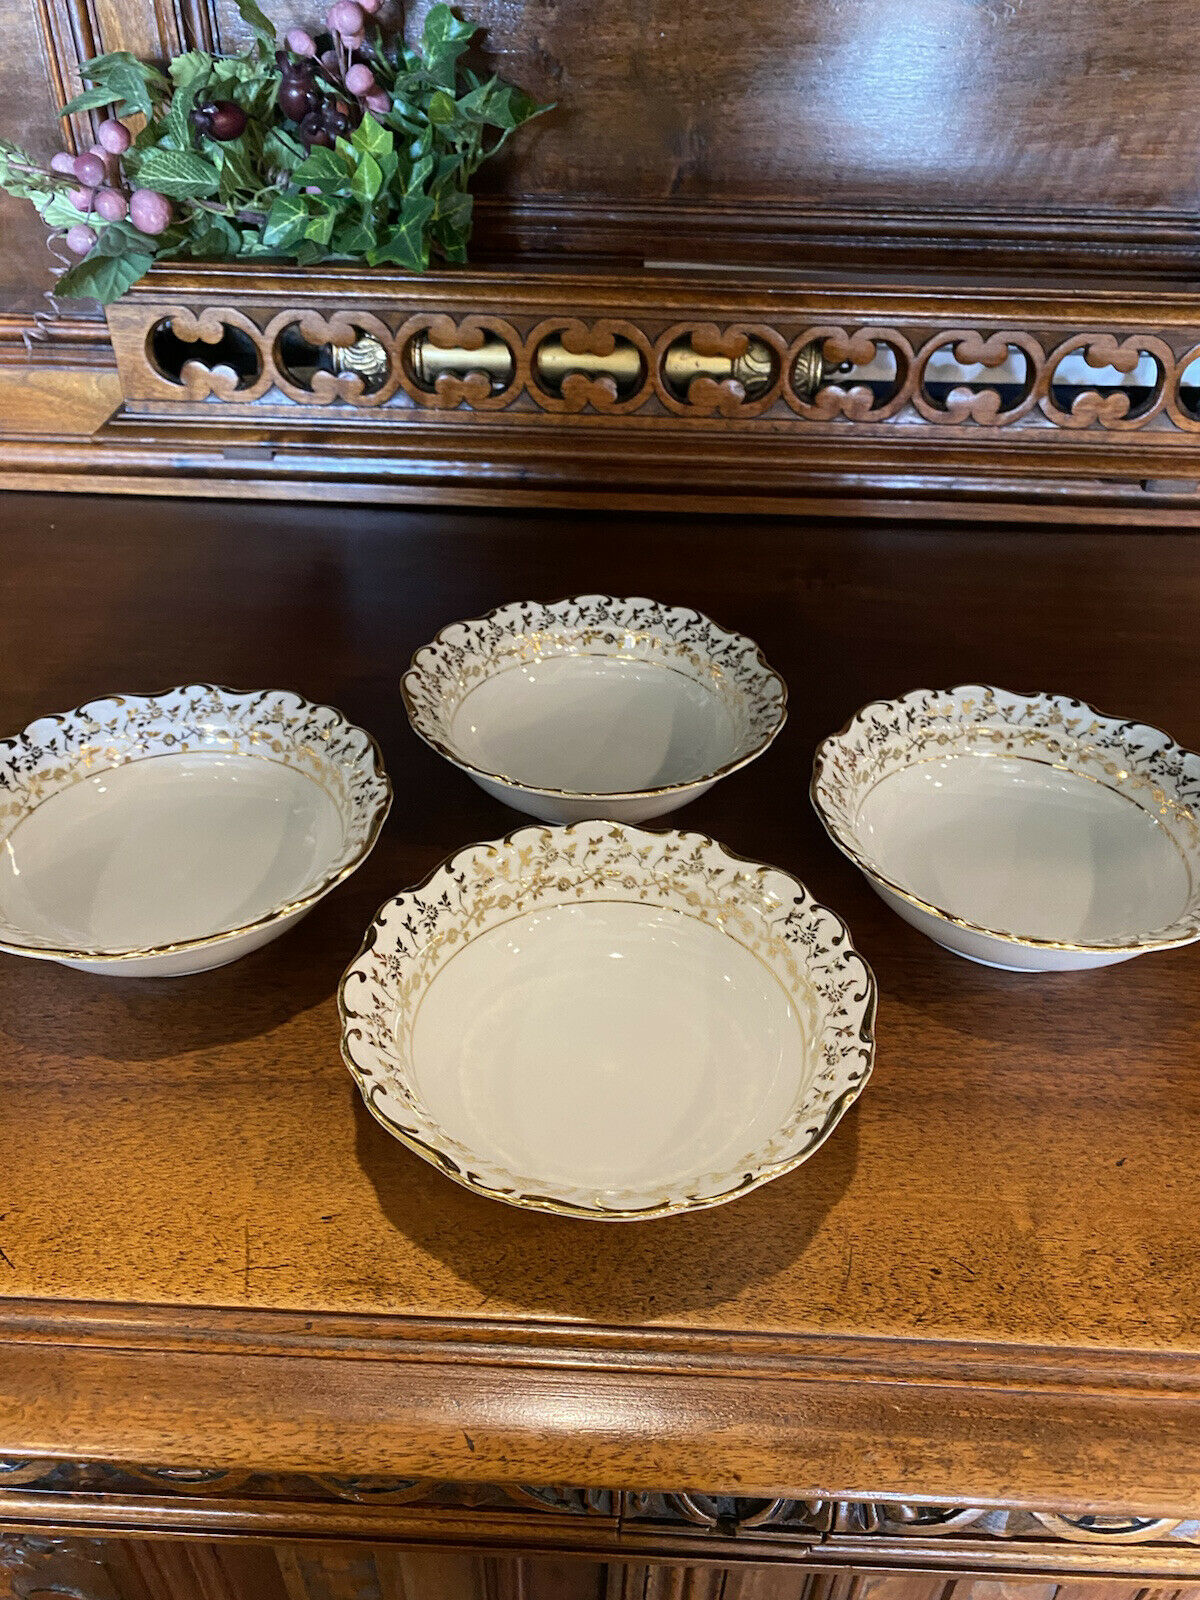 4 Haus Dresden Germany 24kt Gold & White Desert Bowls Excellent Condition.